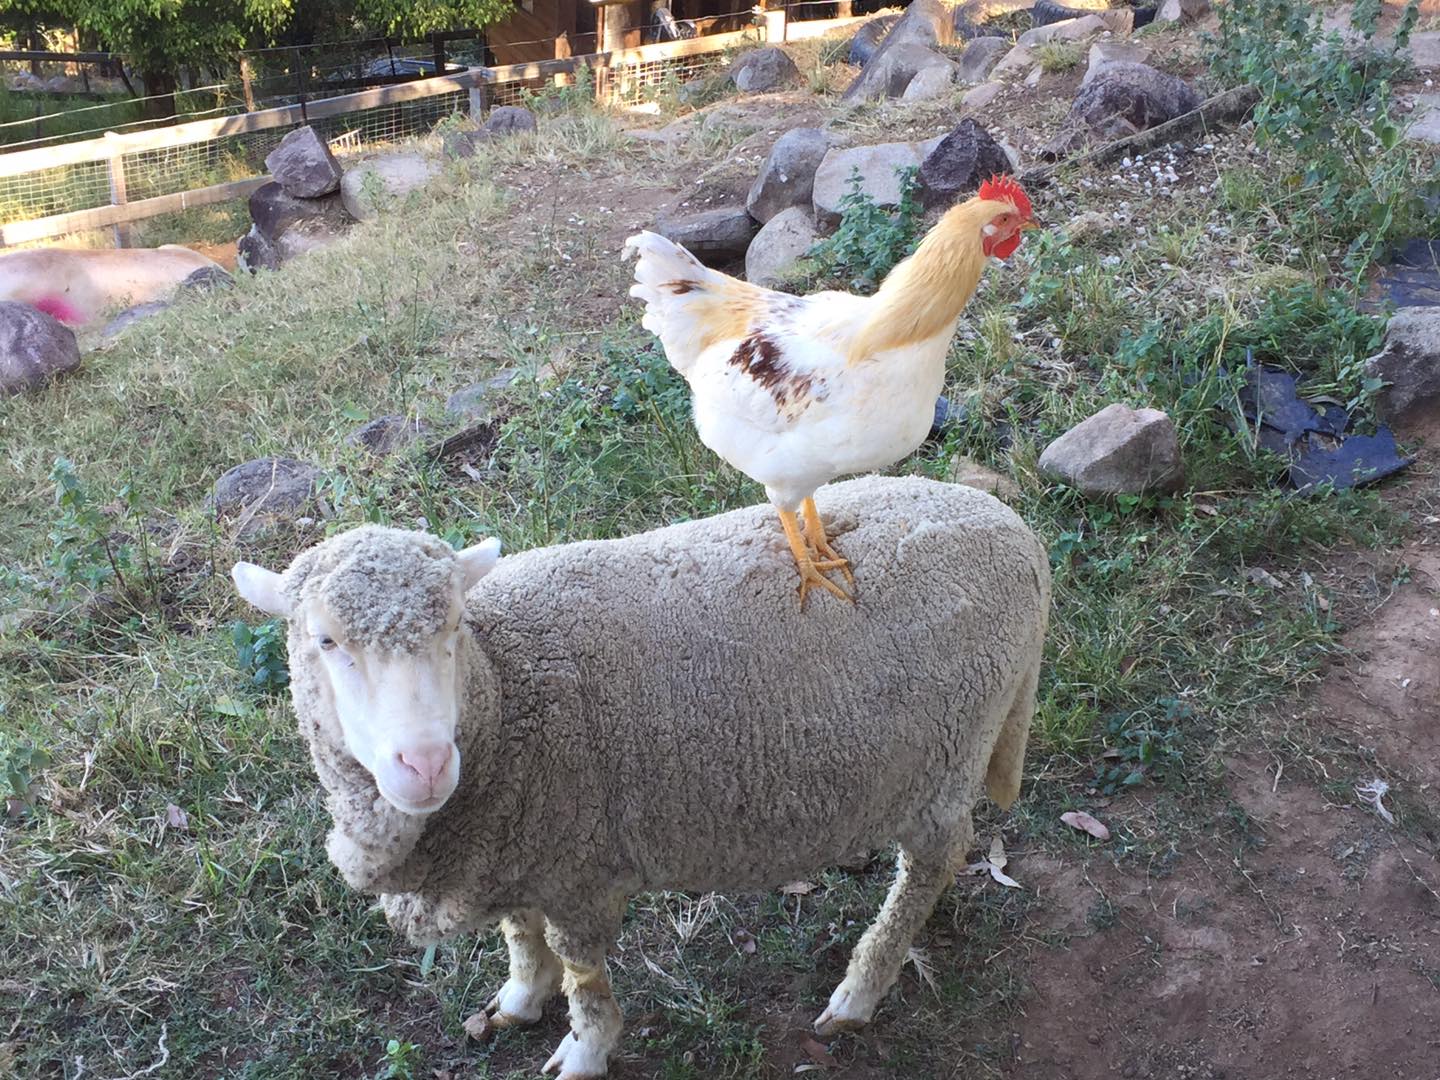 Phoenix riding high on the back of a sanctuary sheep